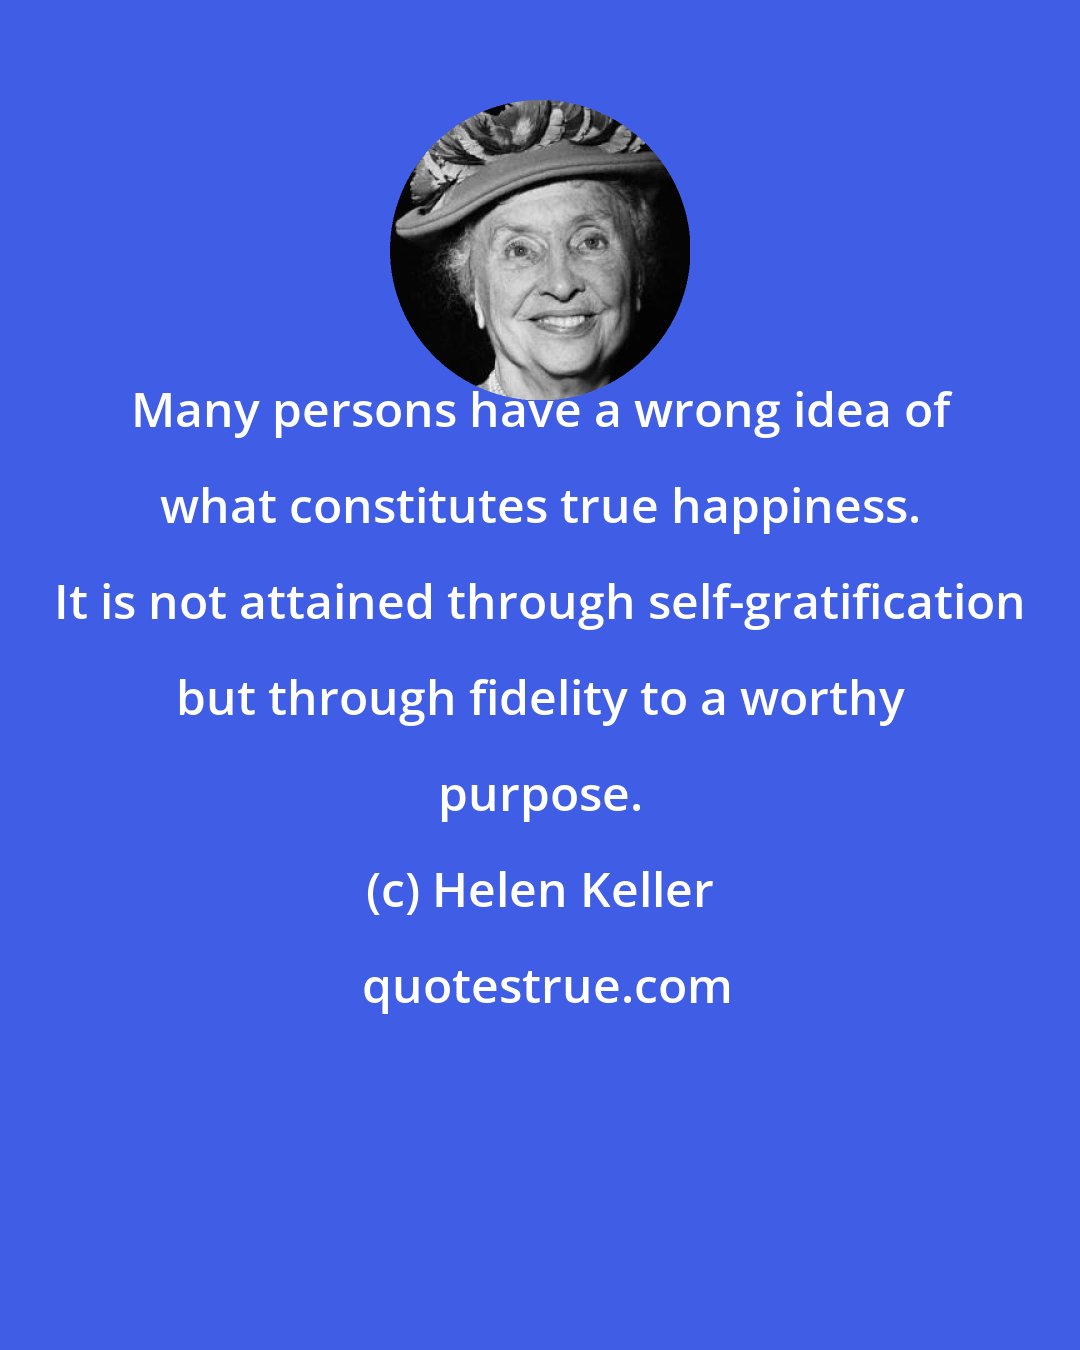 Helen Keller: Many persons have a wrong idea of what constitutes true happiness. It is not attained through self-gratification but through fidelity to a worthy purpose.